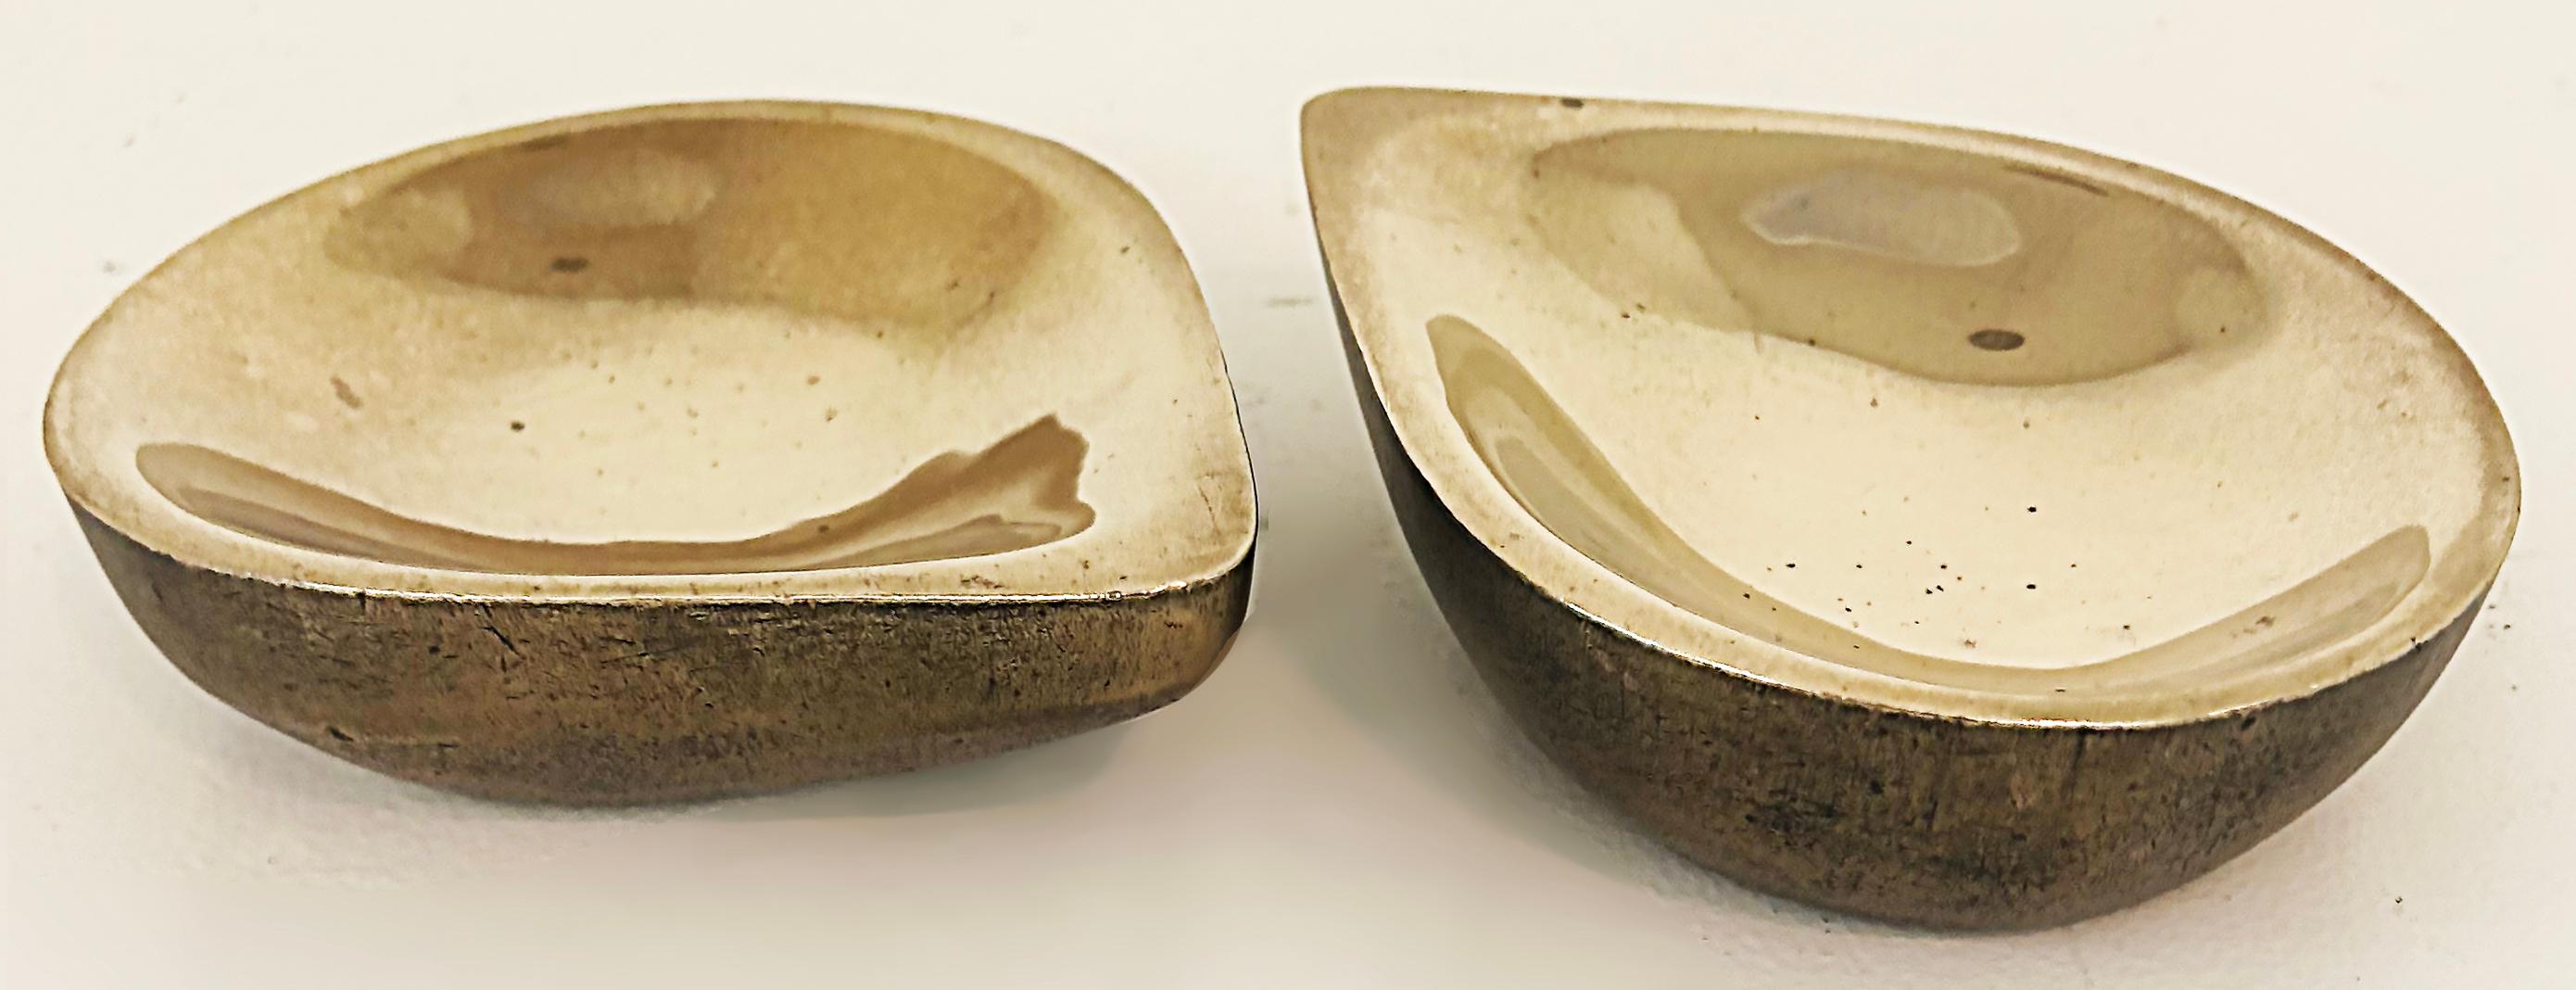 Steven Haulenbeek Ice Cast Bronze Tear-Drop Bowls, Heavy, Substantial Pair In Good Condition For Sale In Miami, FL